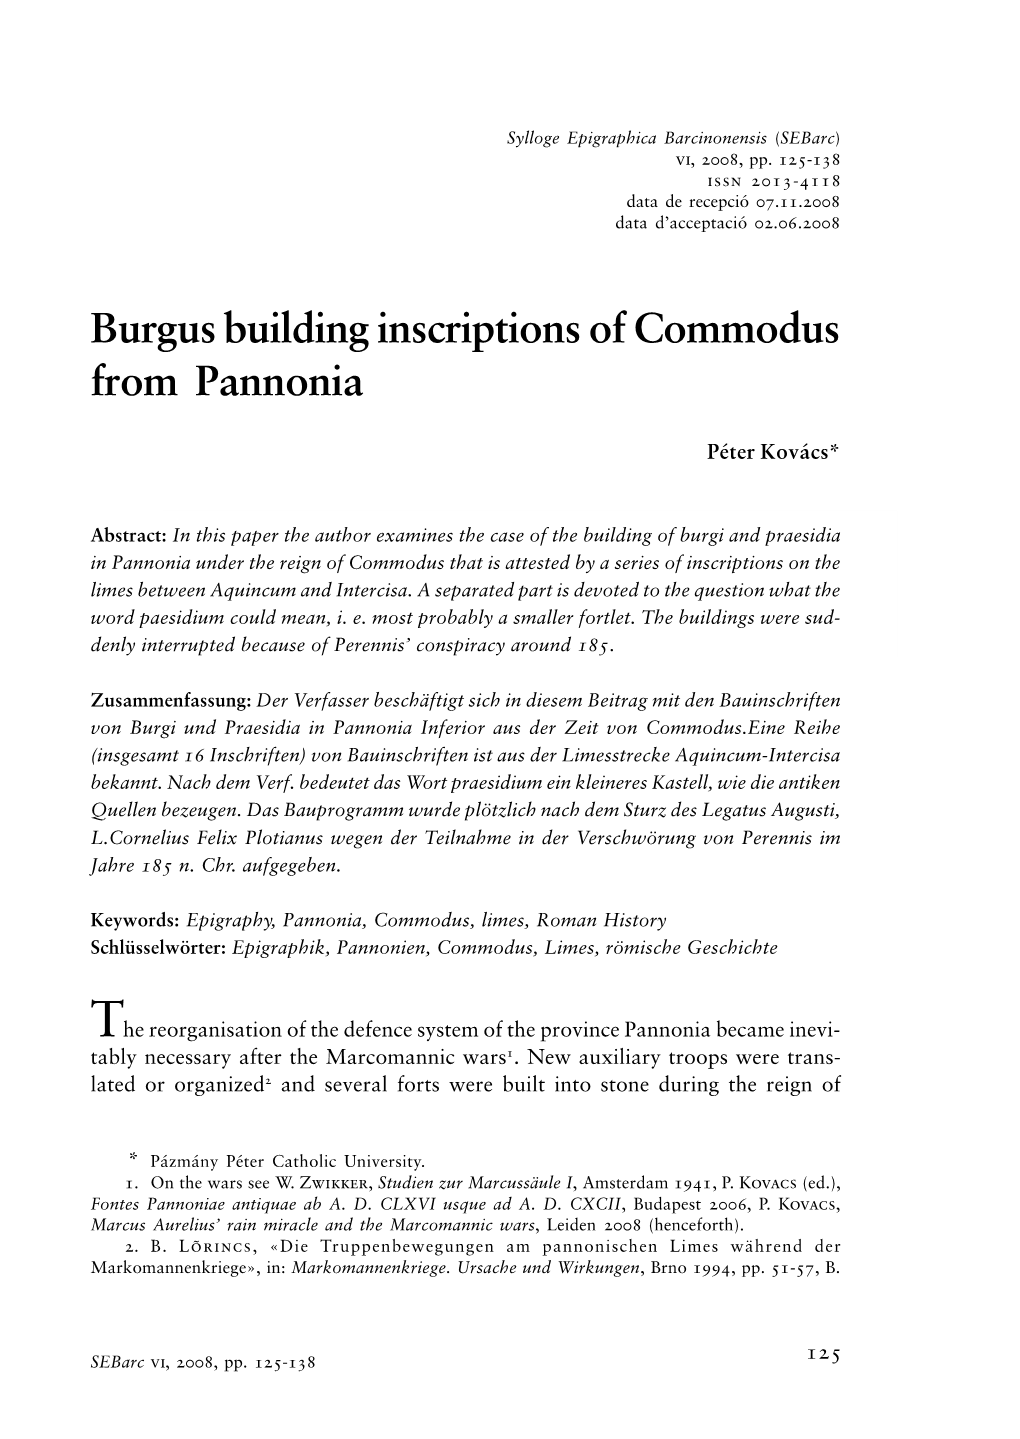 Burgus Building Inscriptions of Commodus from Pannonia